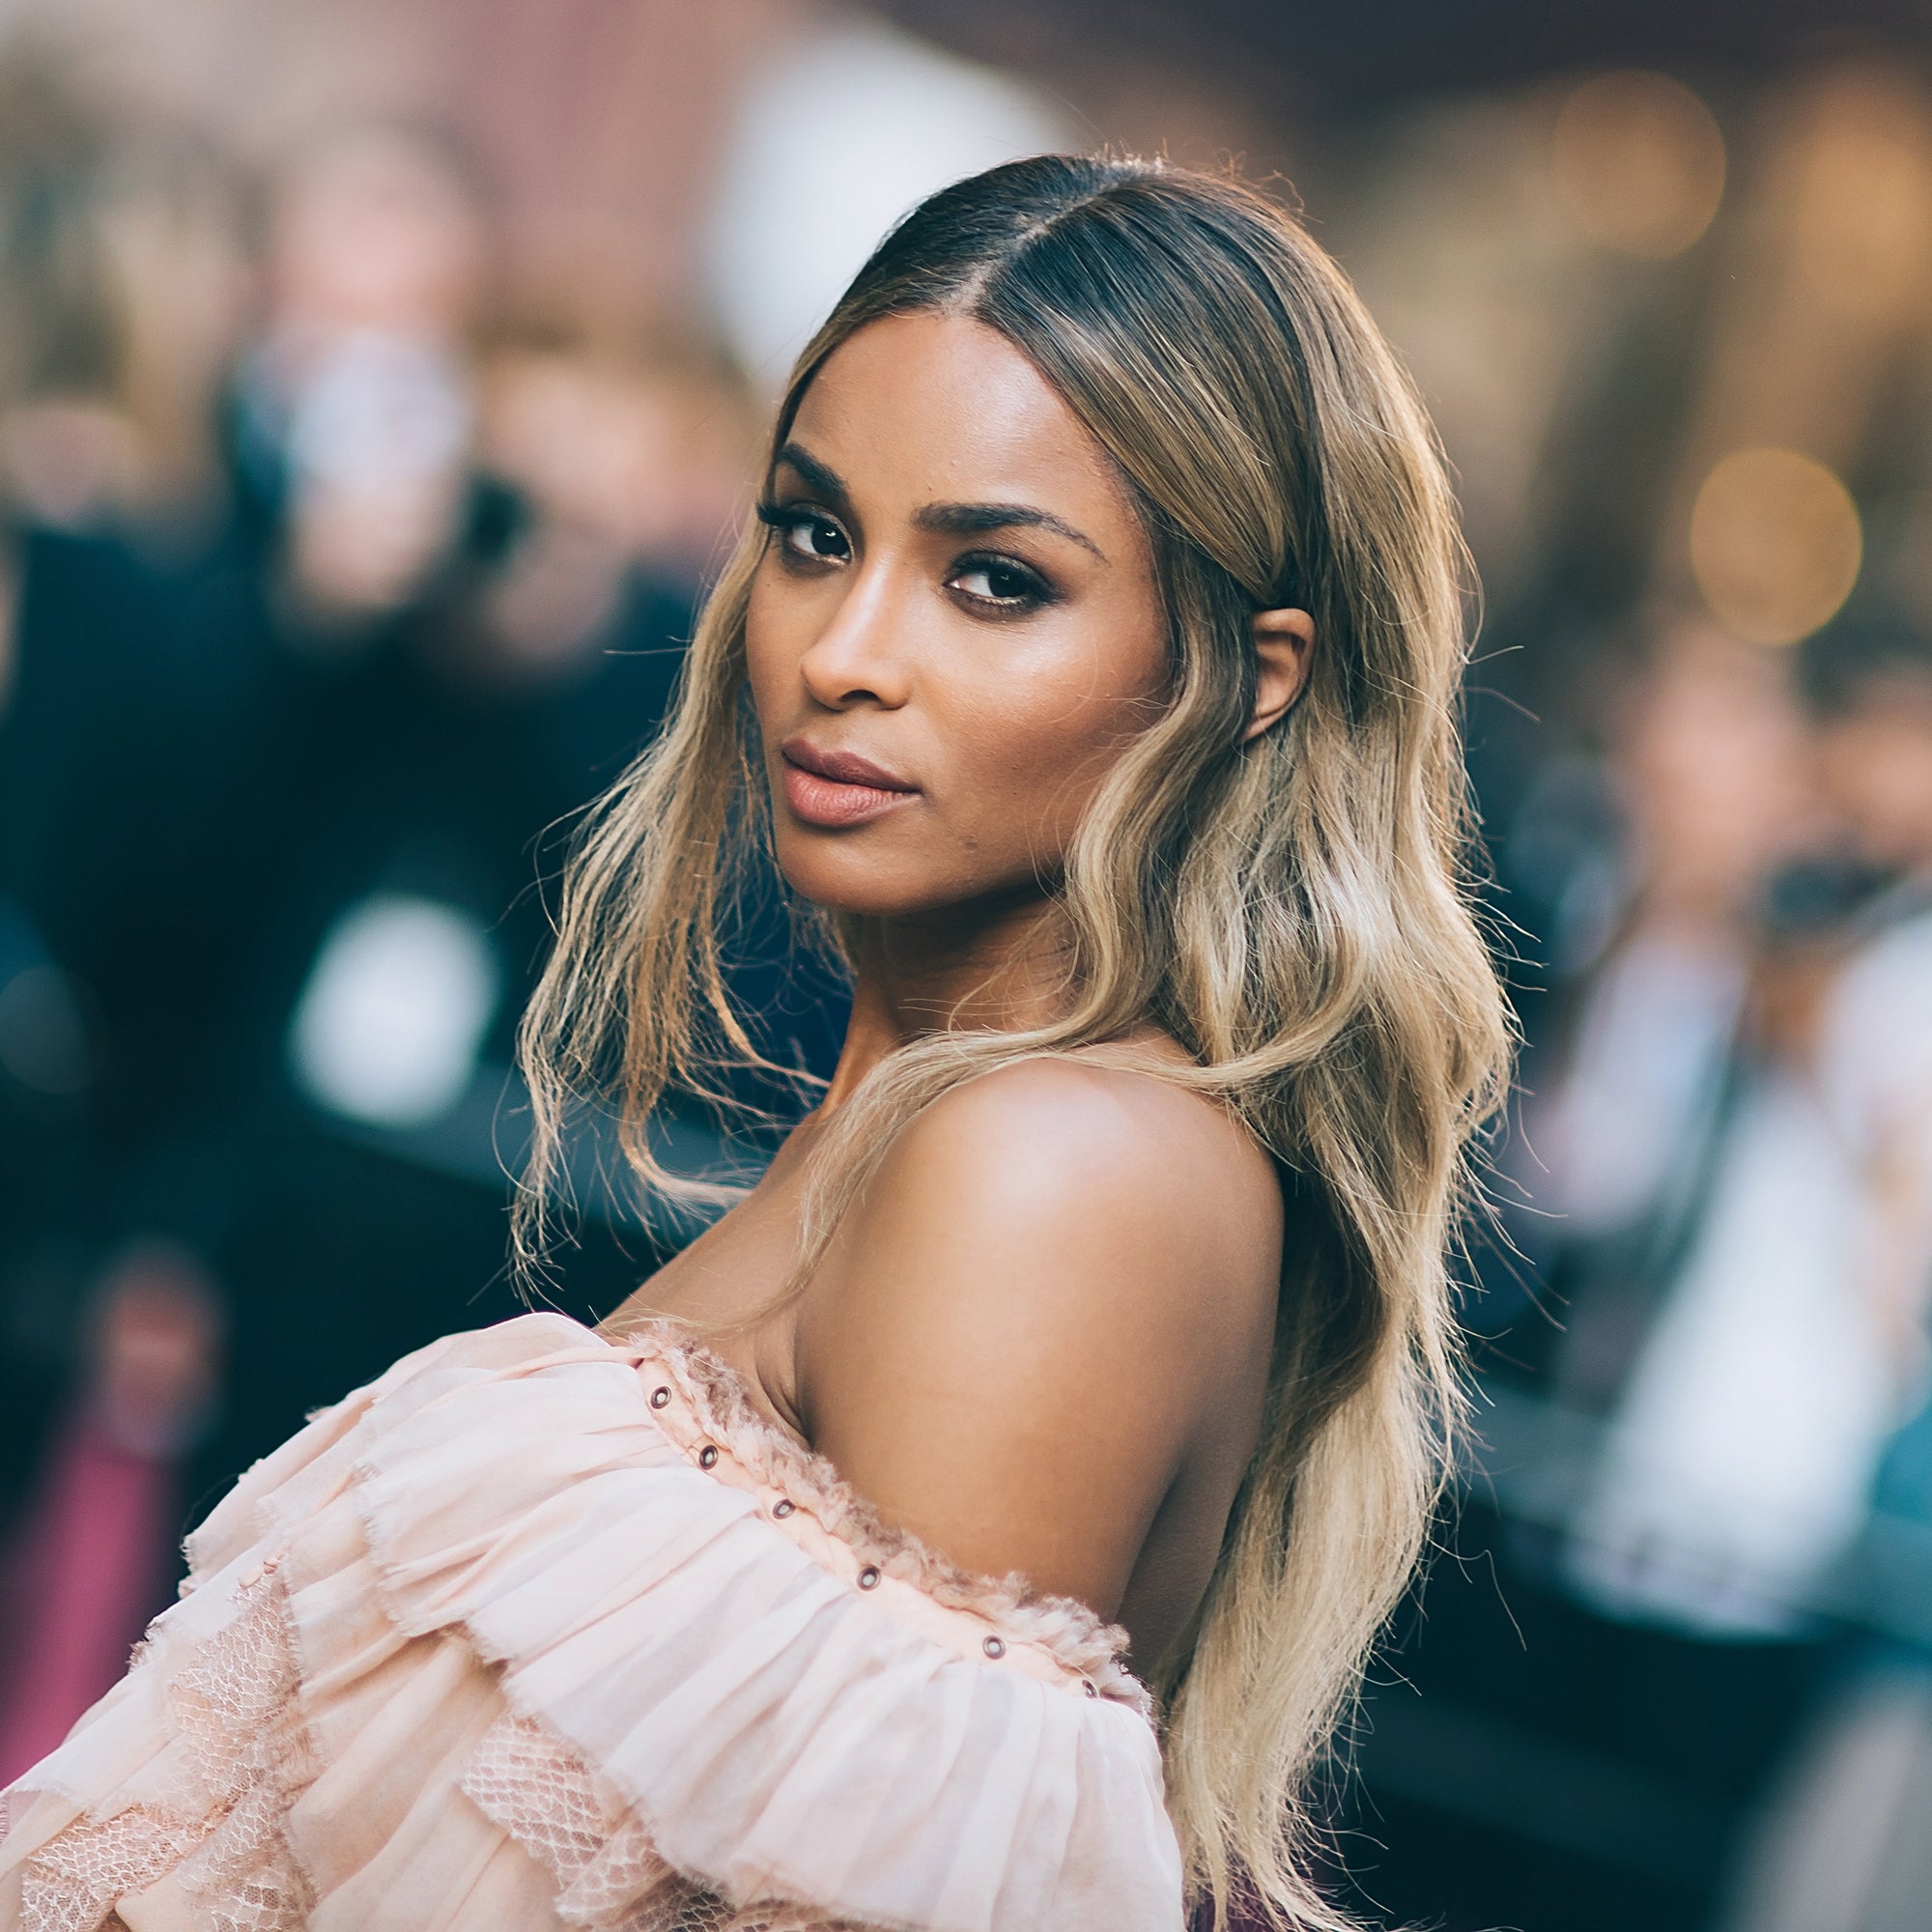 Bride-to-Be Ciara Looks Forward to Creating Her Own Wedding Dress
